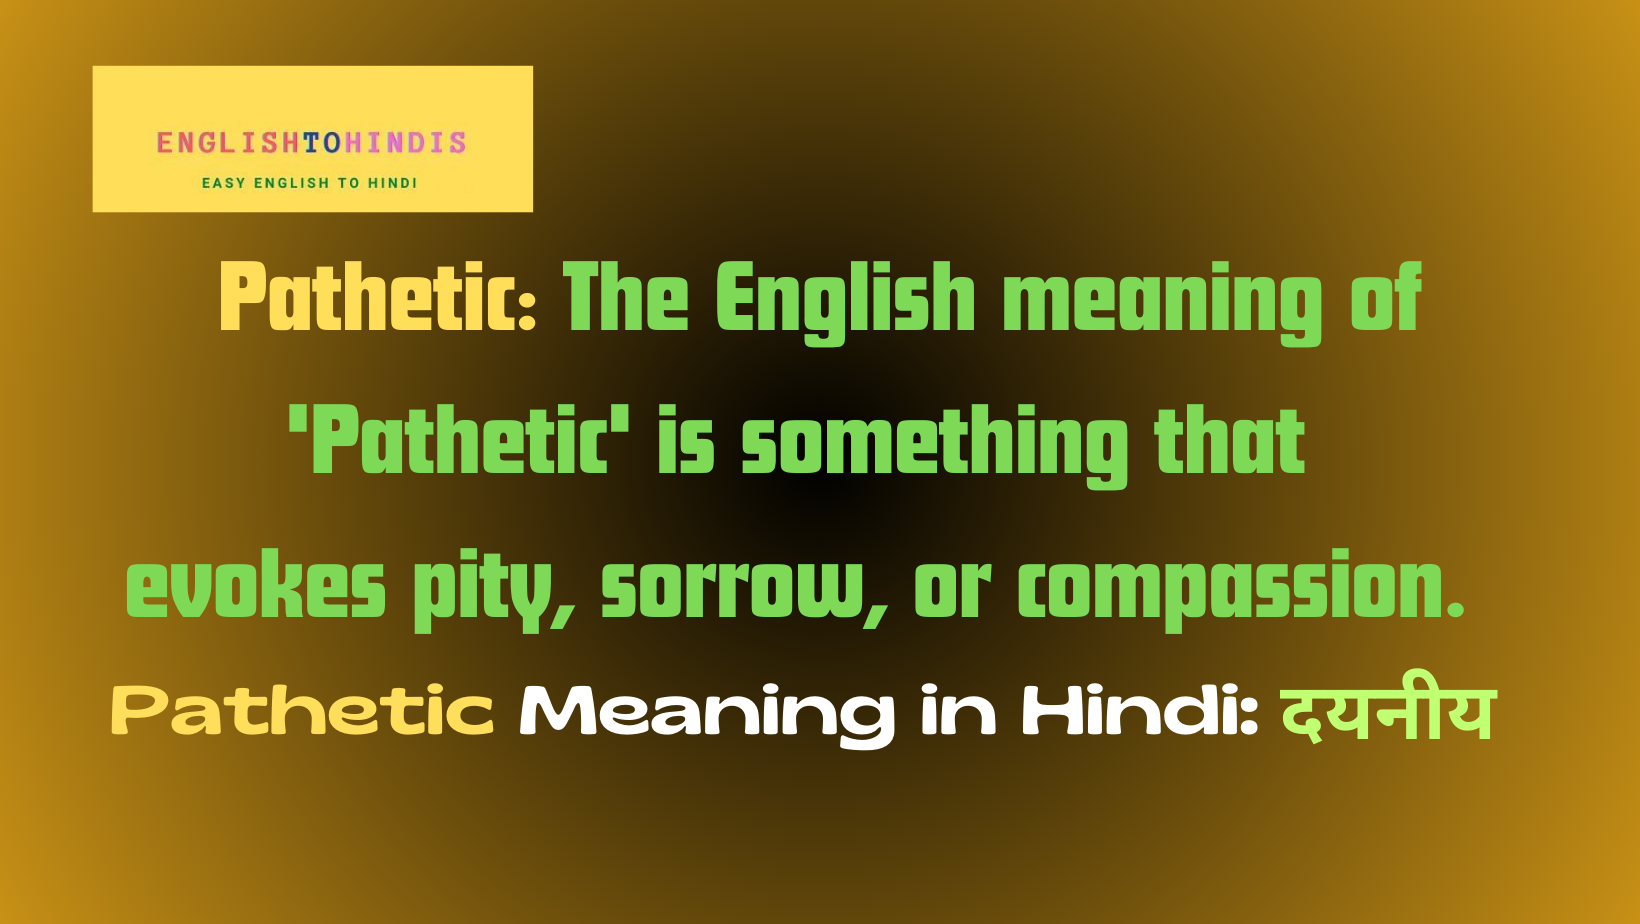 Pathetic meaning in Hindi